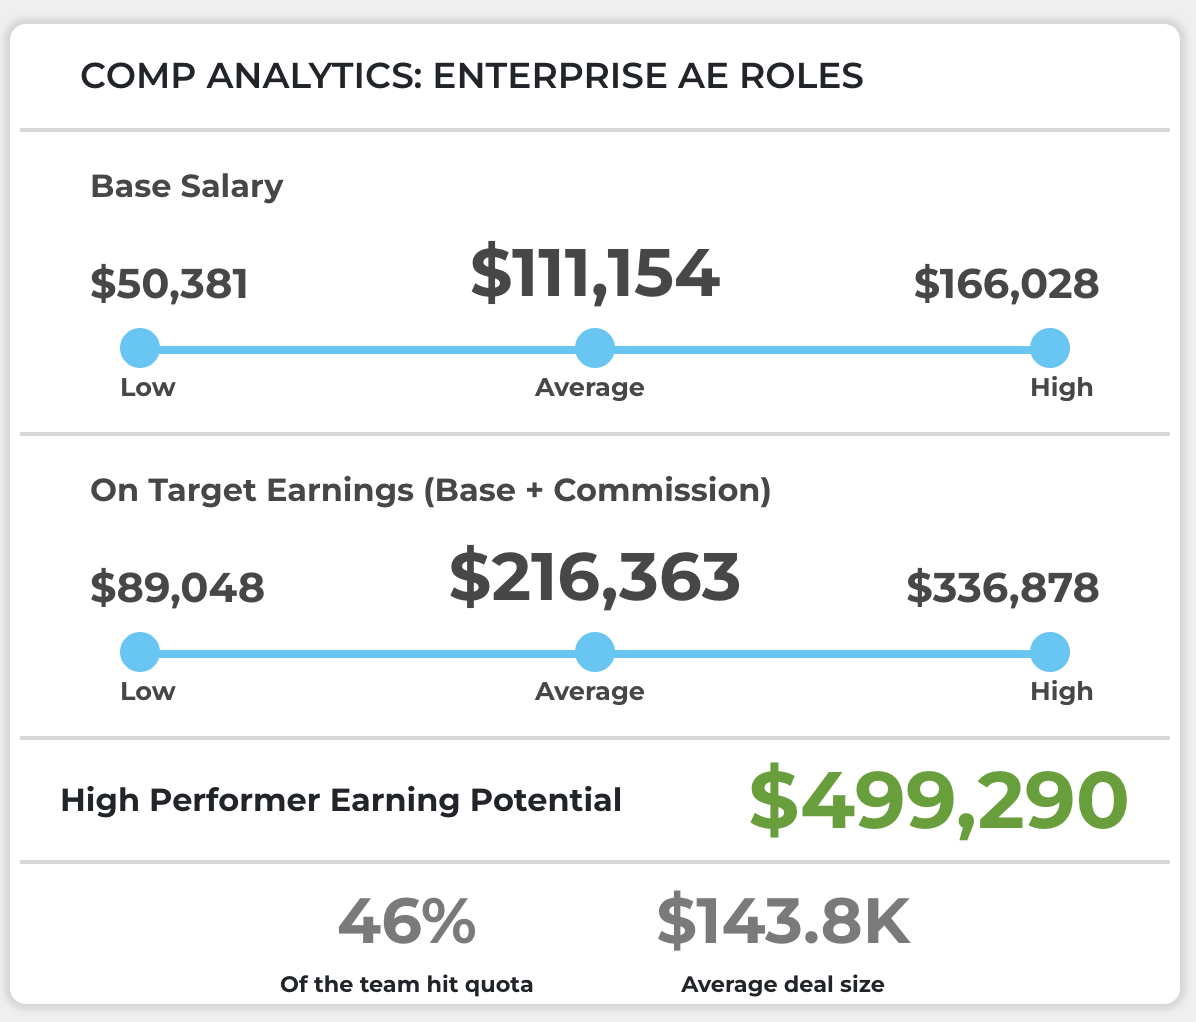 Comp analytics for enterprise ae roles